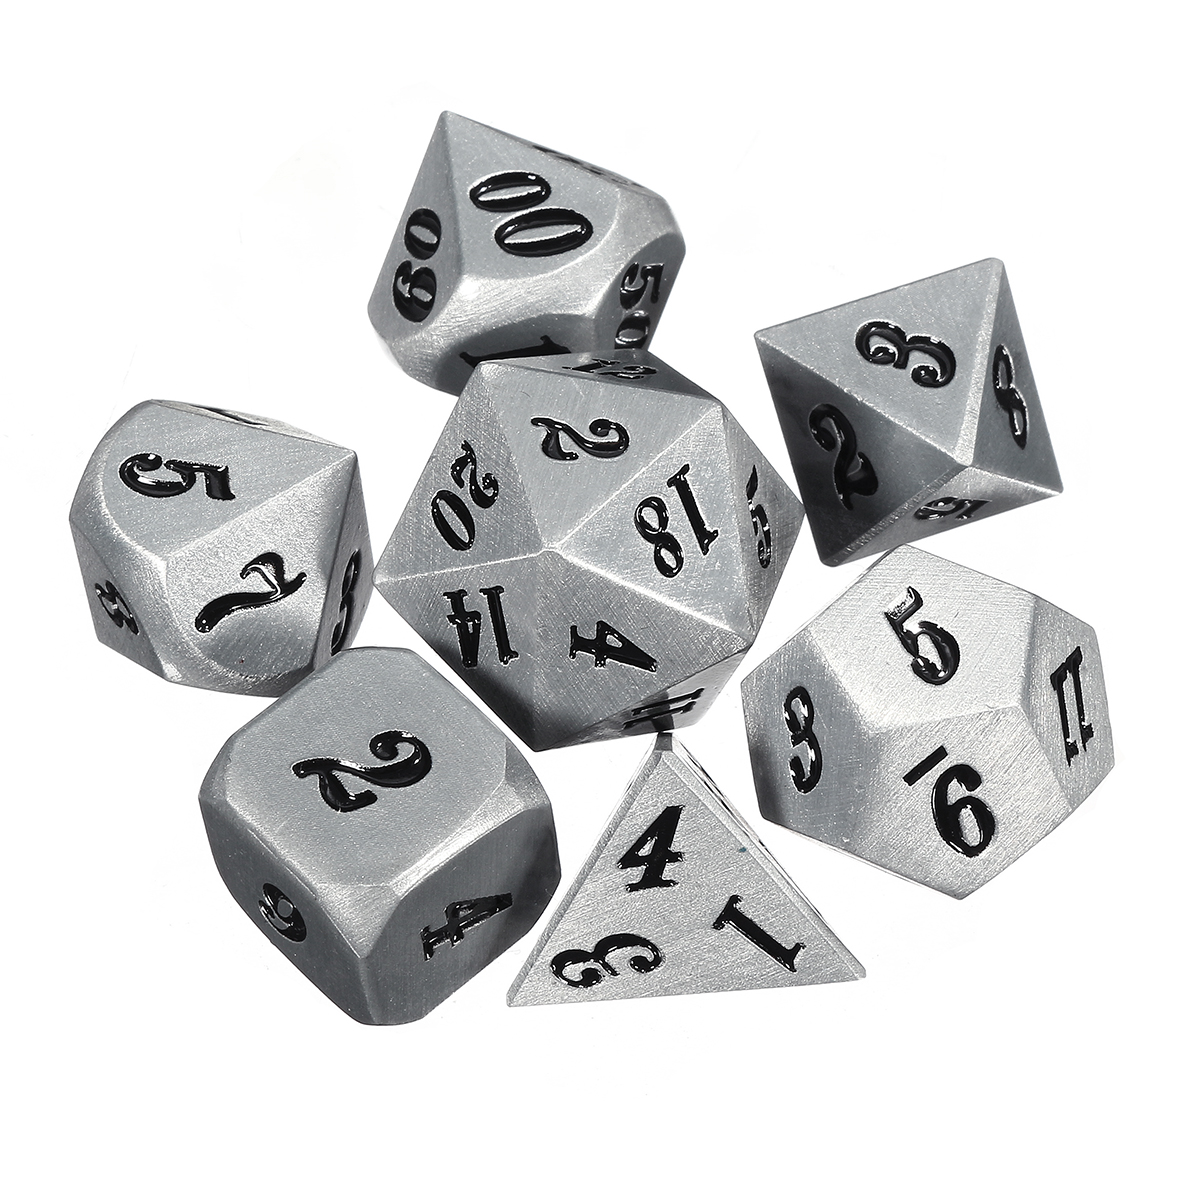 7Pc-Solid-Metal-Heavy-Dice-Set-Polyhedral-Dices-Role-Playing-Games-Dice-Gadget-RPG-1391316-9